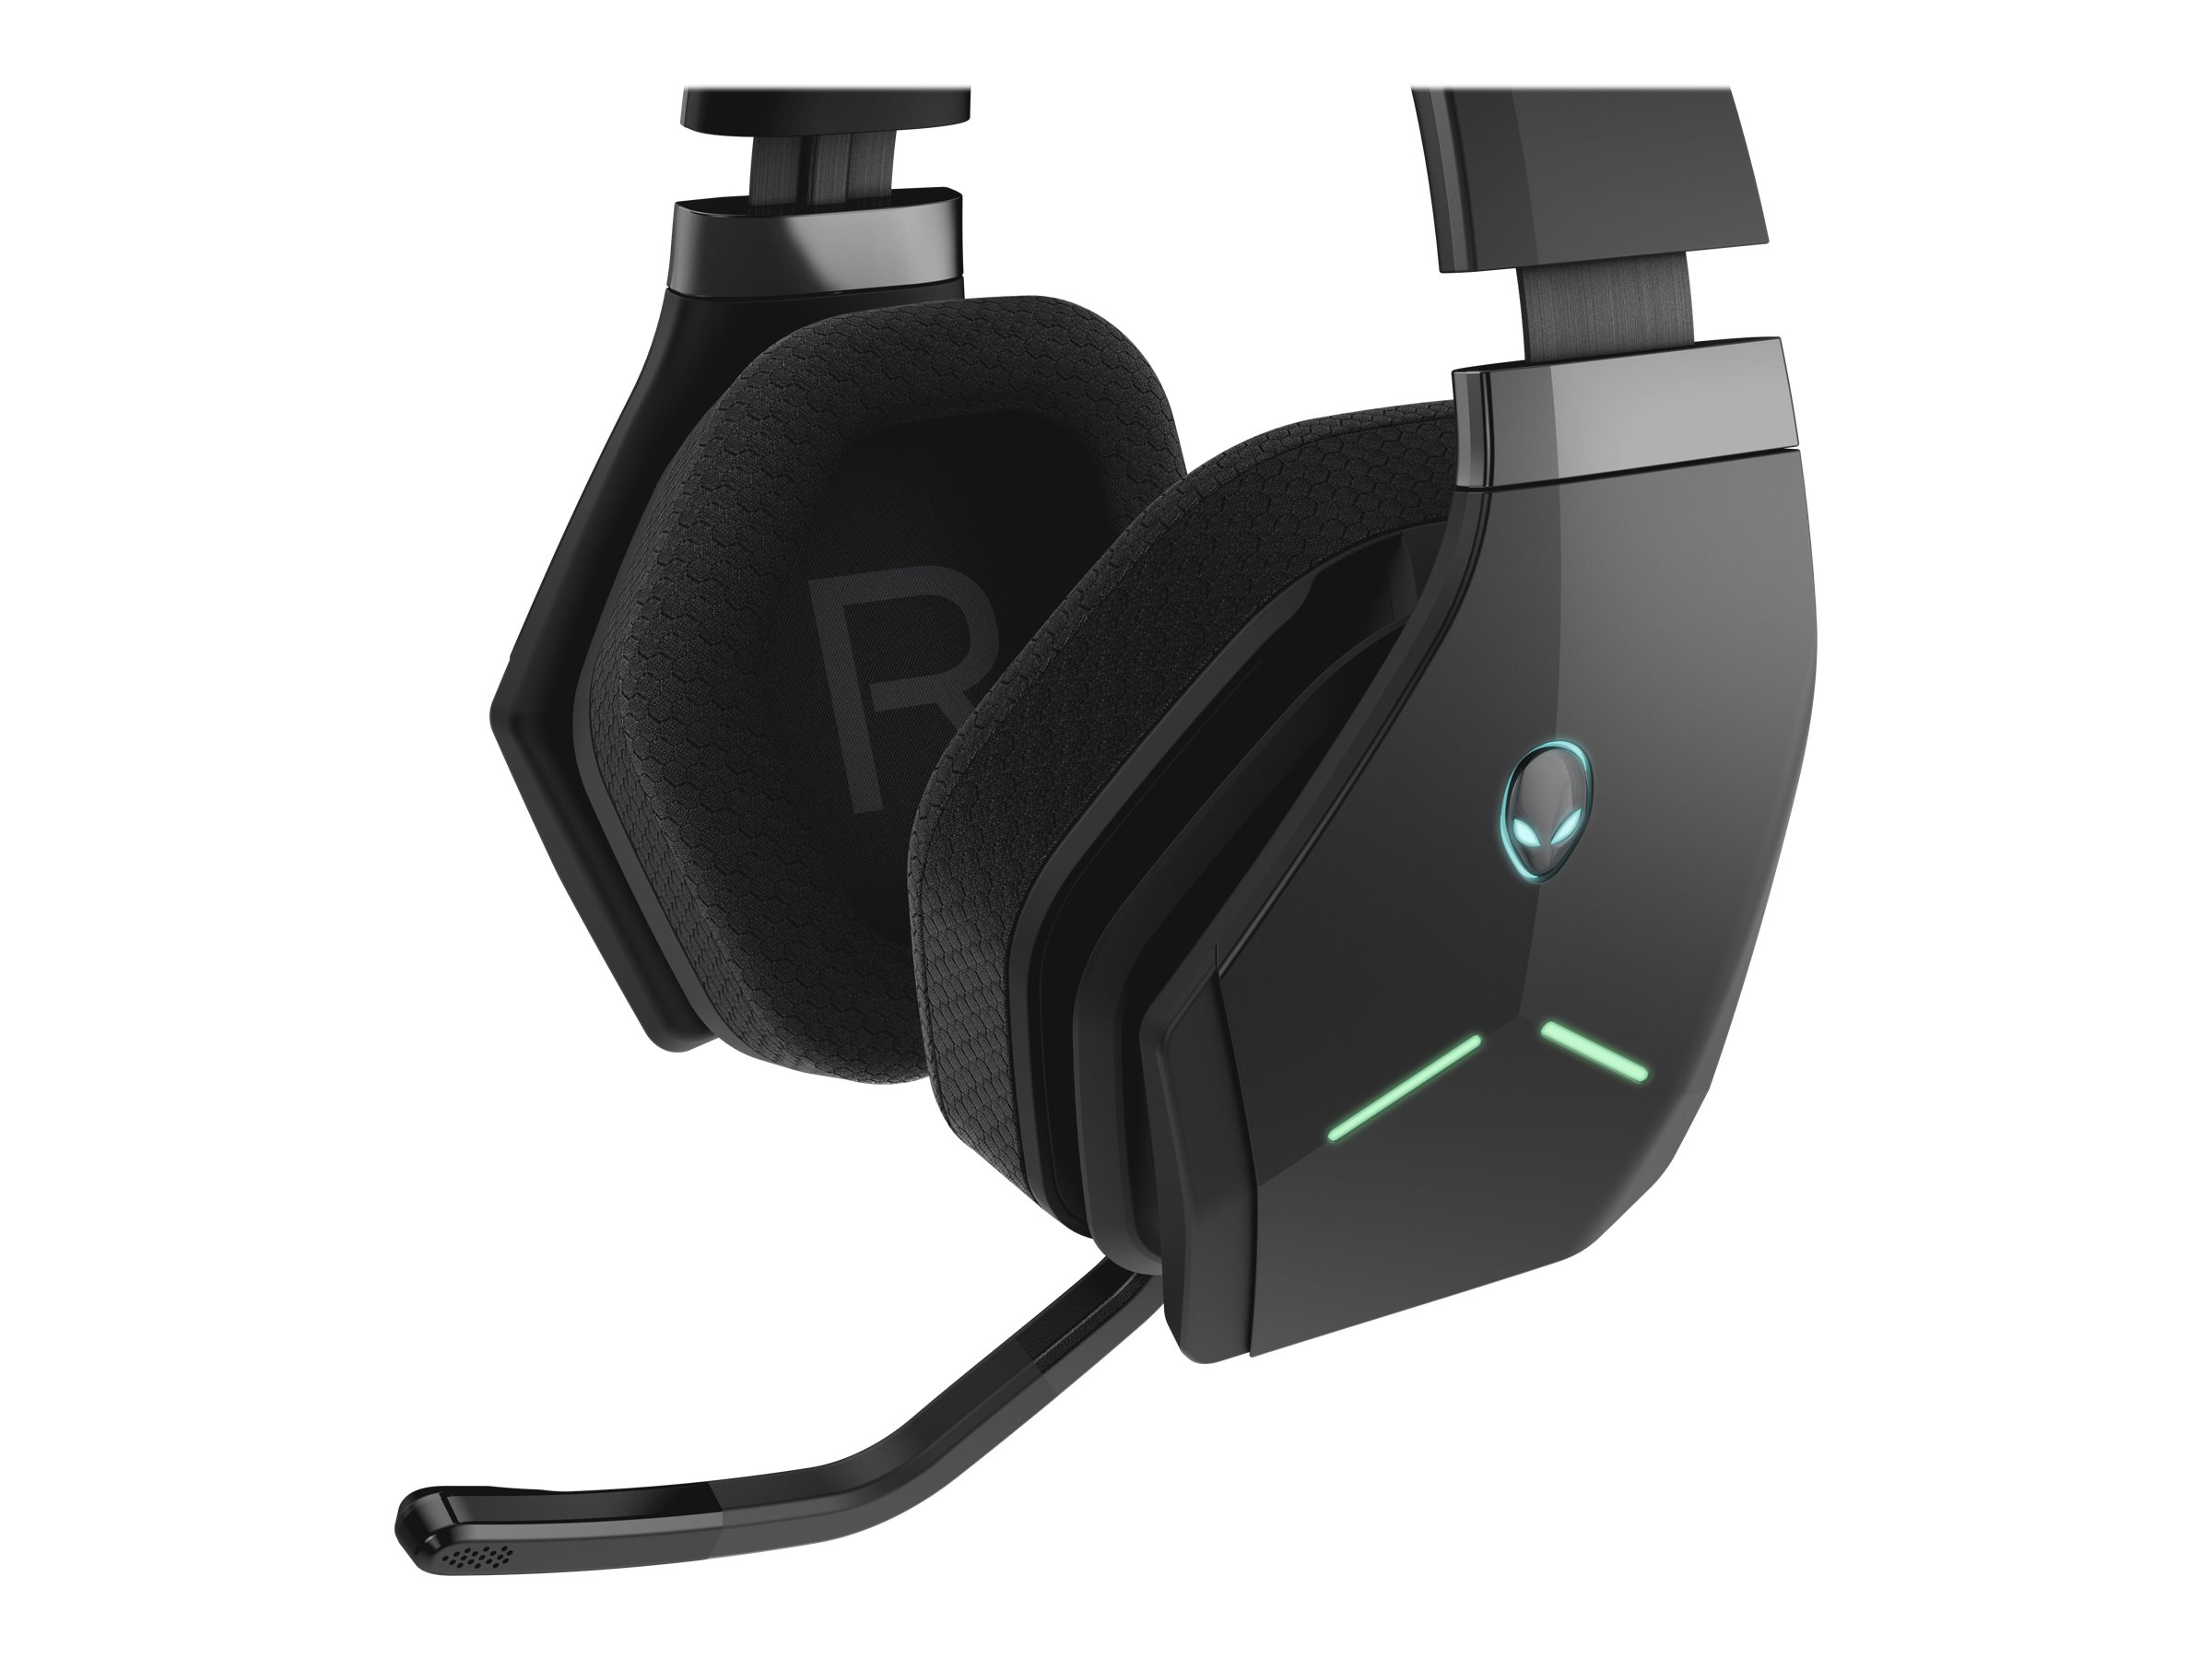 Wireless gaming headset. Alienware aw988. Наушники Alienware. Dell Alienware aw988. Dell Alienware Wireless Gaming Headset.